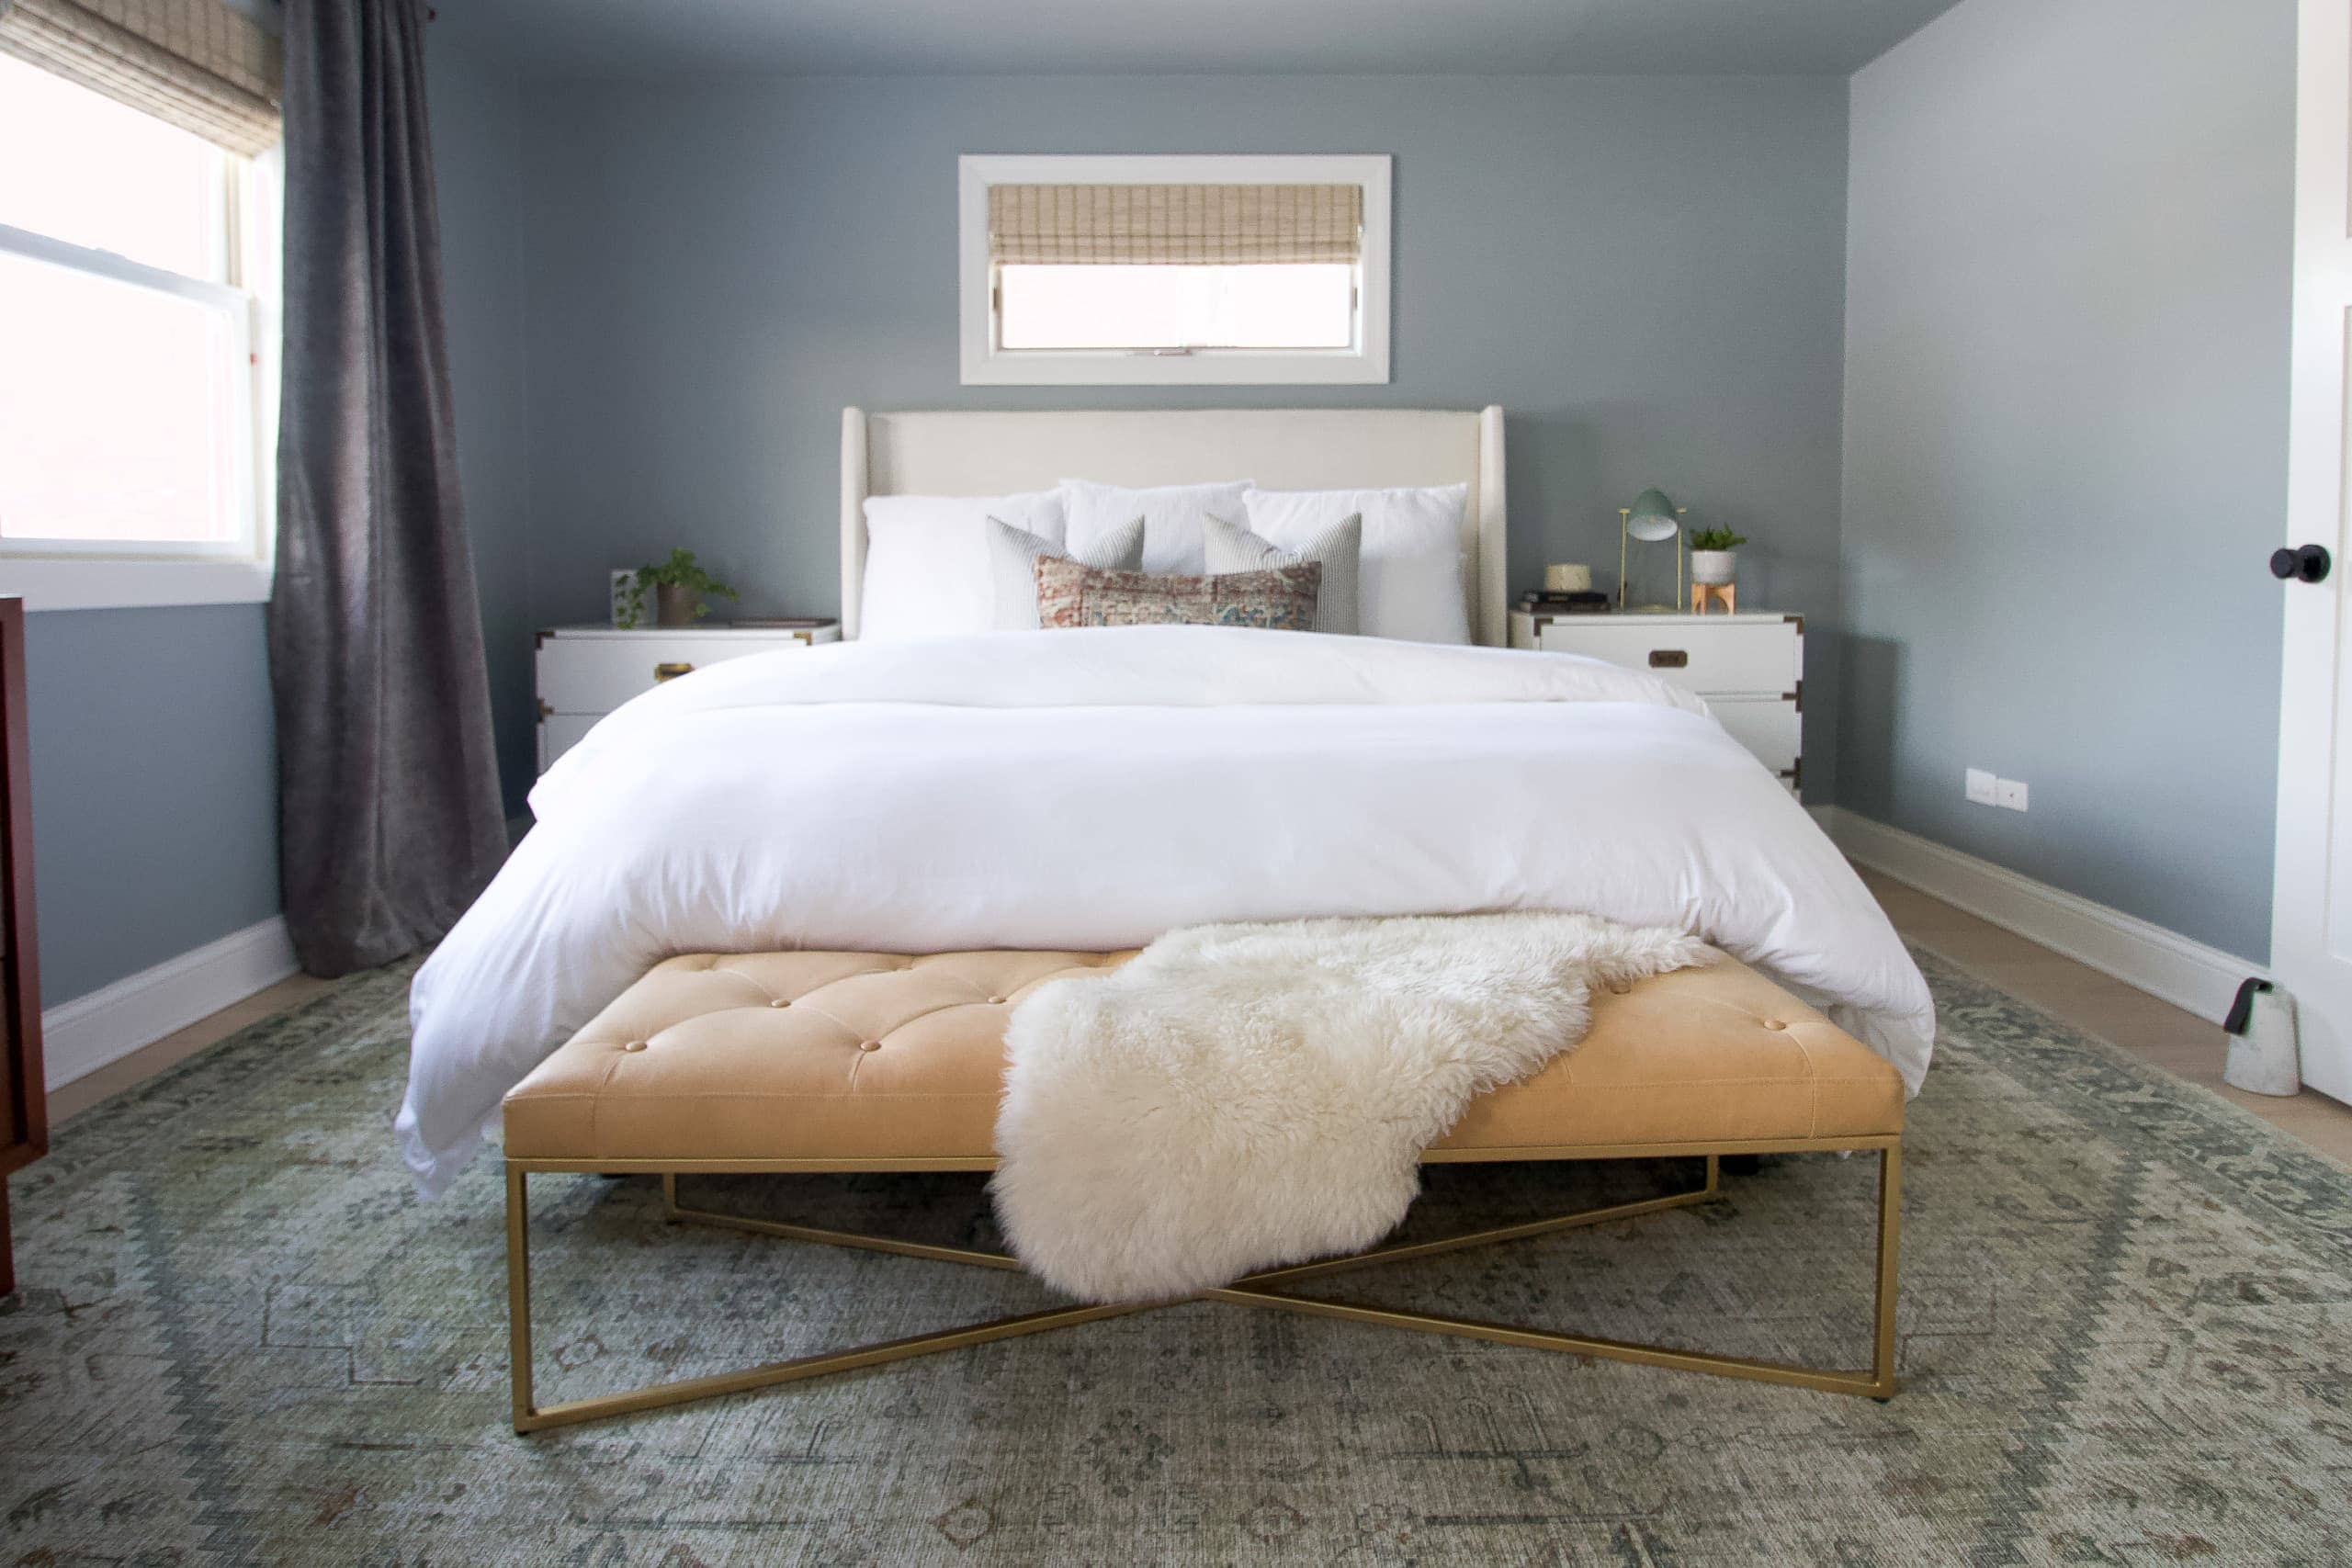 How to arrange pillows on a king size bed